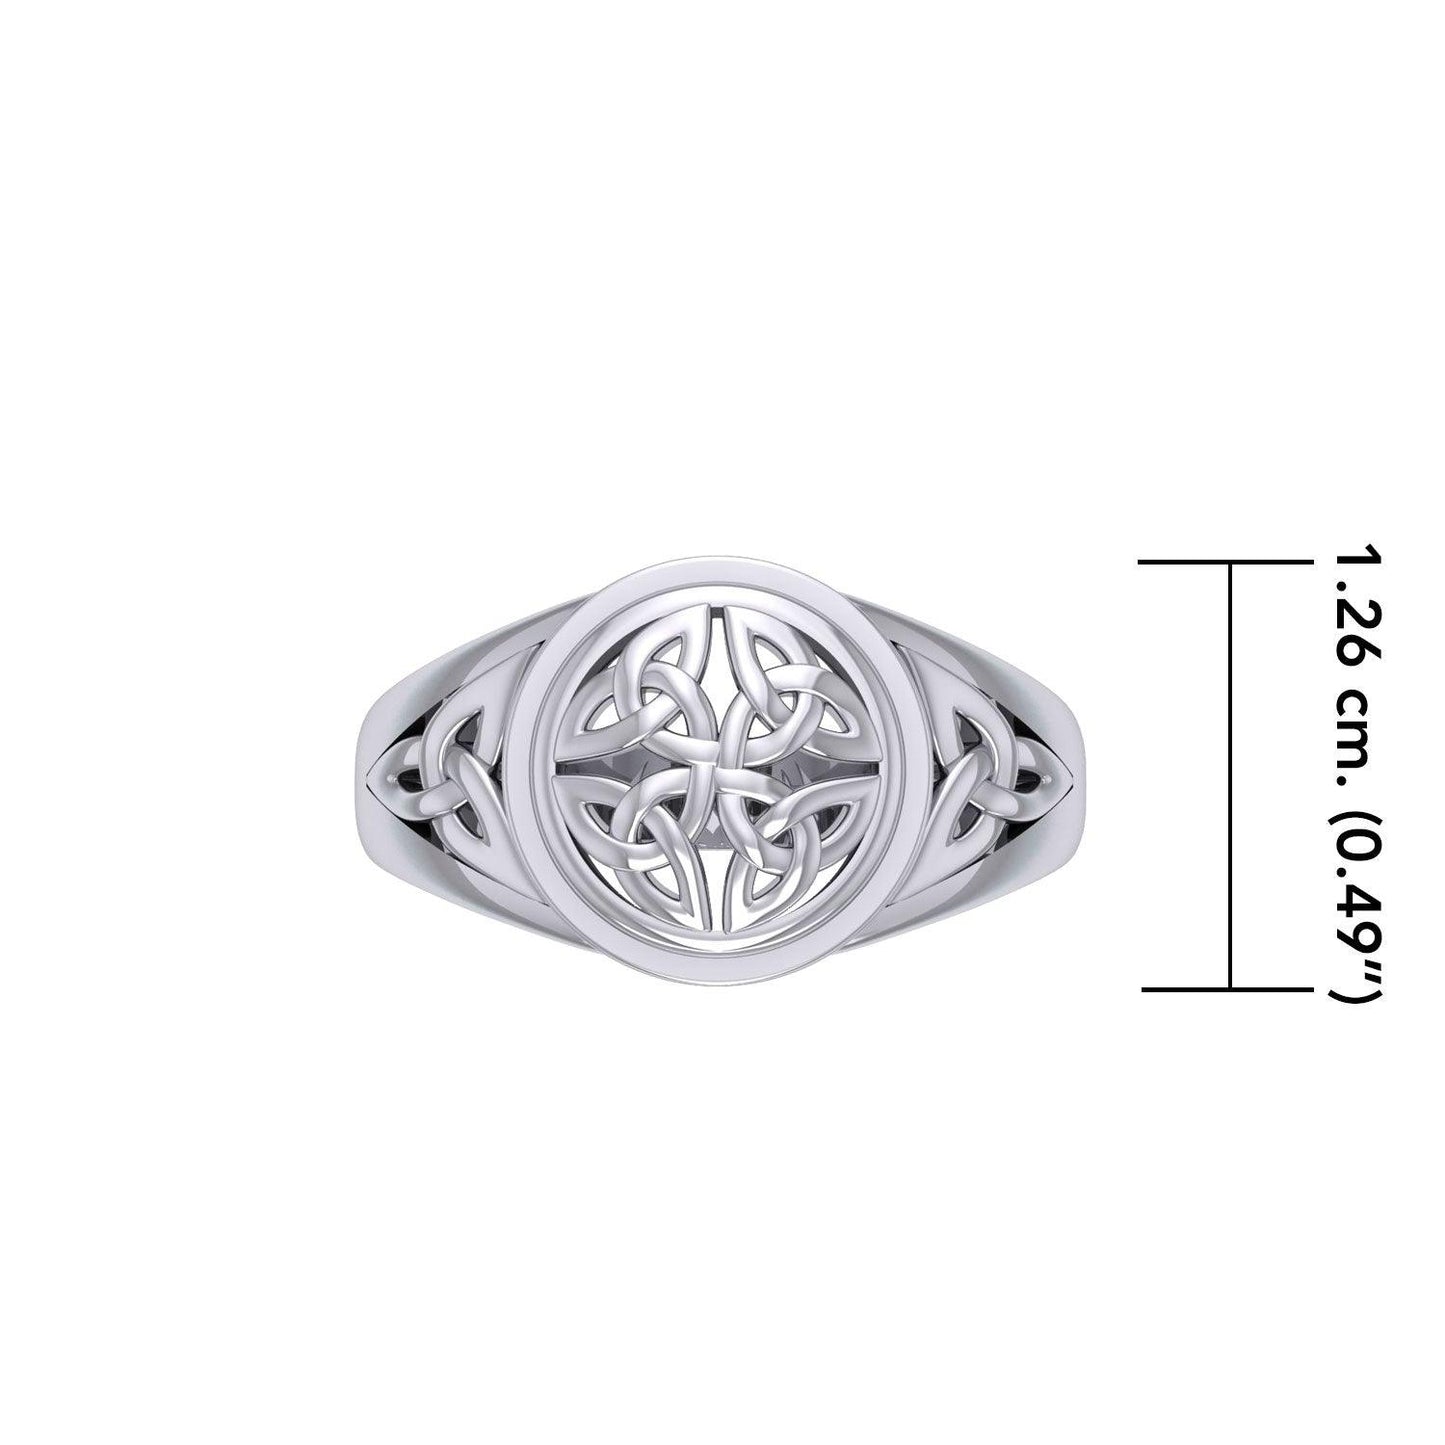 Celtic Quaternary Knot Silver Ring TRI1758 - peterstone.dropshipping